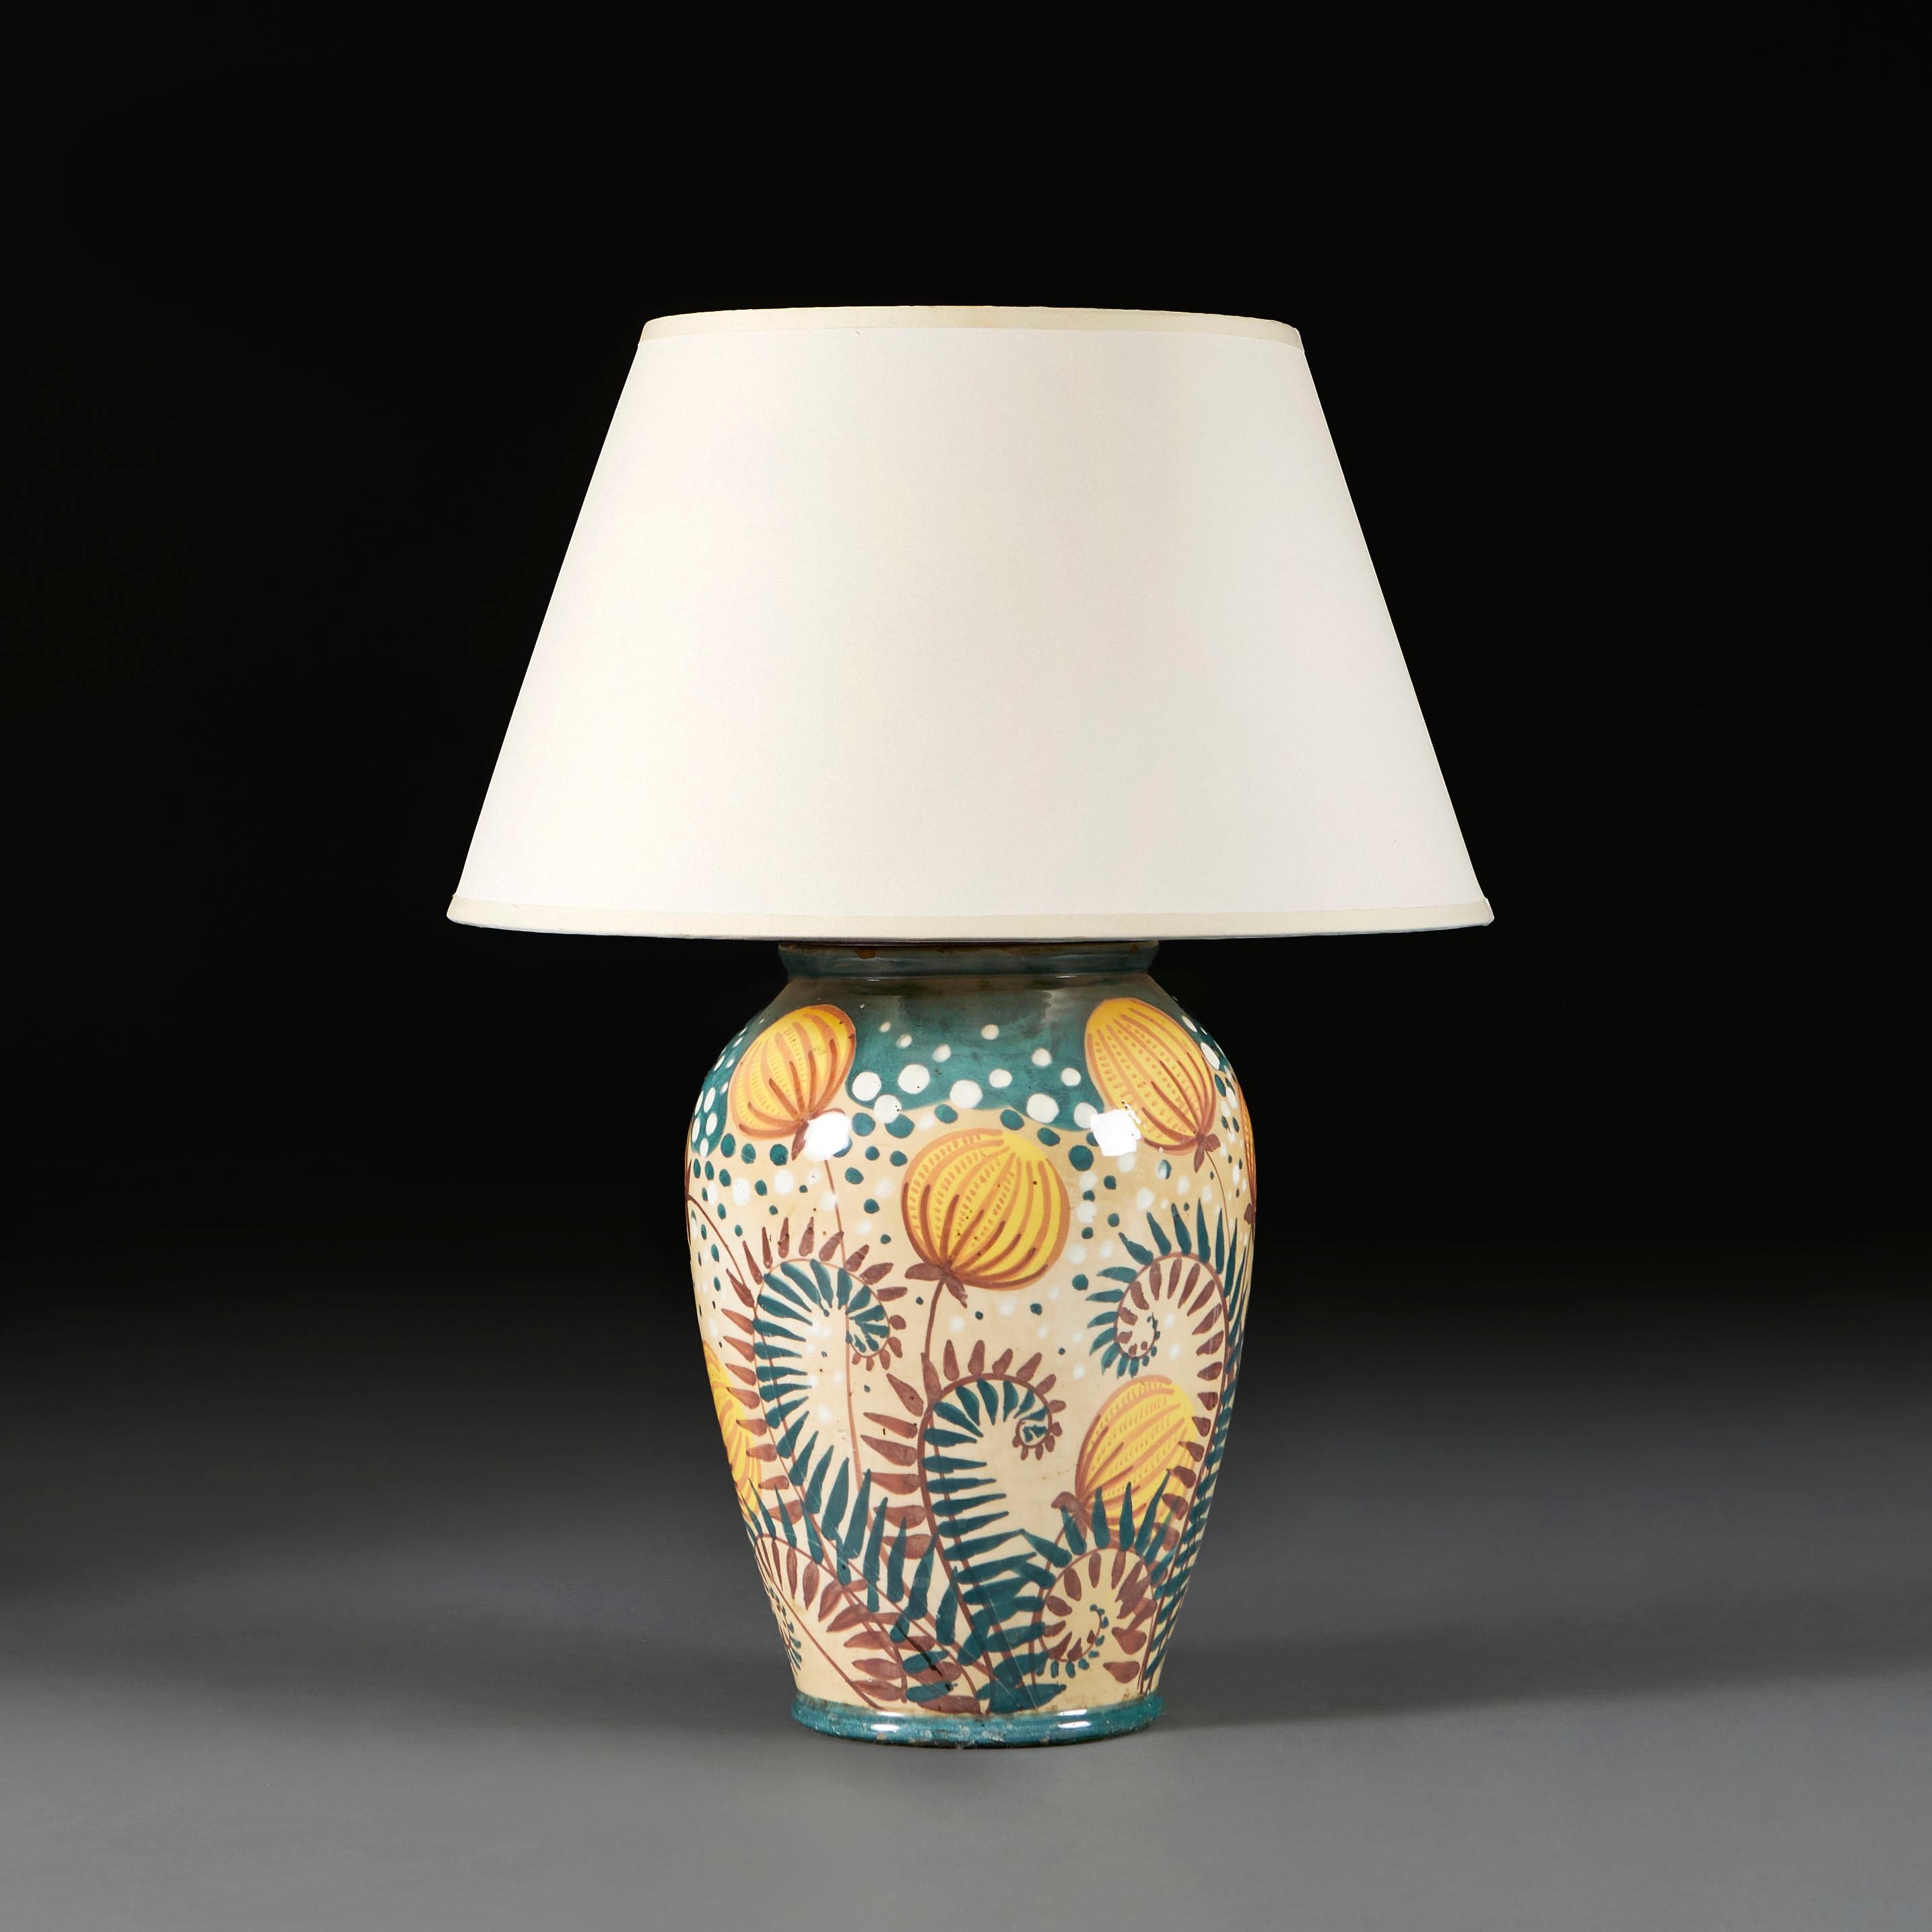 England, 1910

An Arts and Crafts ceramic urn vase decorated with underglaze paintings of unfurling fern leaves and yellow pomegranates fruits, now mounted as a lamp. 

Photographed with 16” diameter pale cream card Pembroke lampshade.

Currently